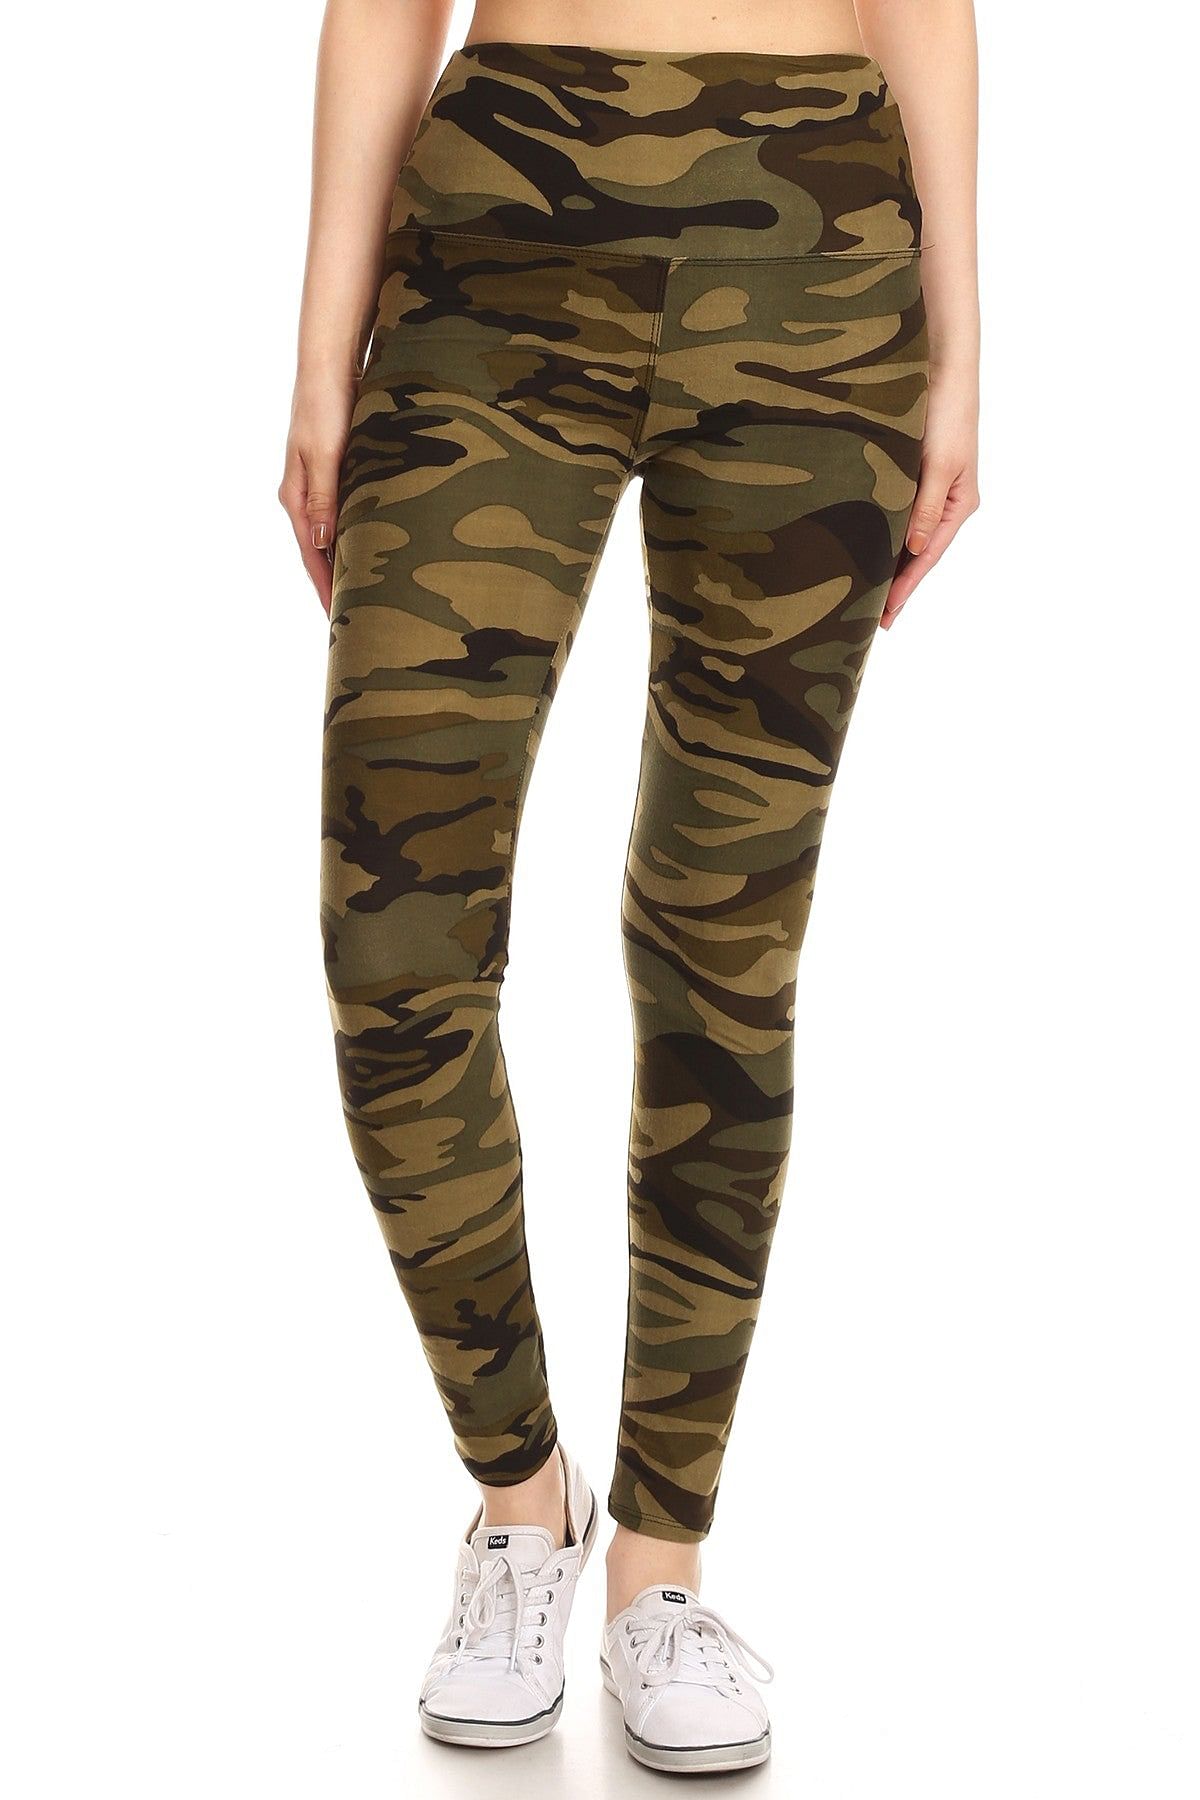 Wild Fable Leggings SIDE POCKETS Womens Workout Camo Green High Waisted,  LARGE 